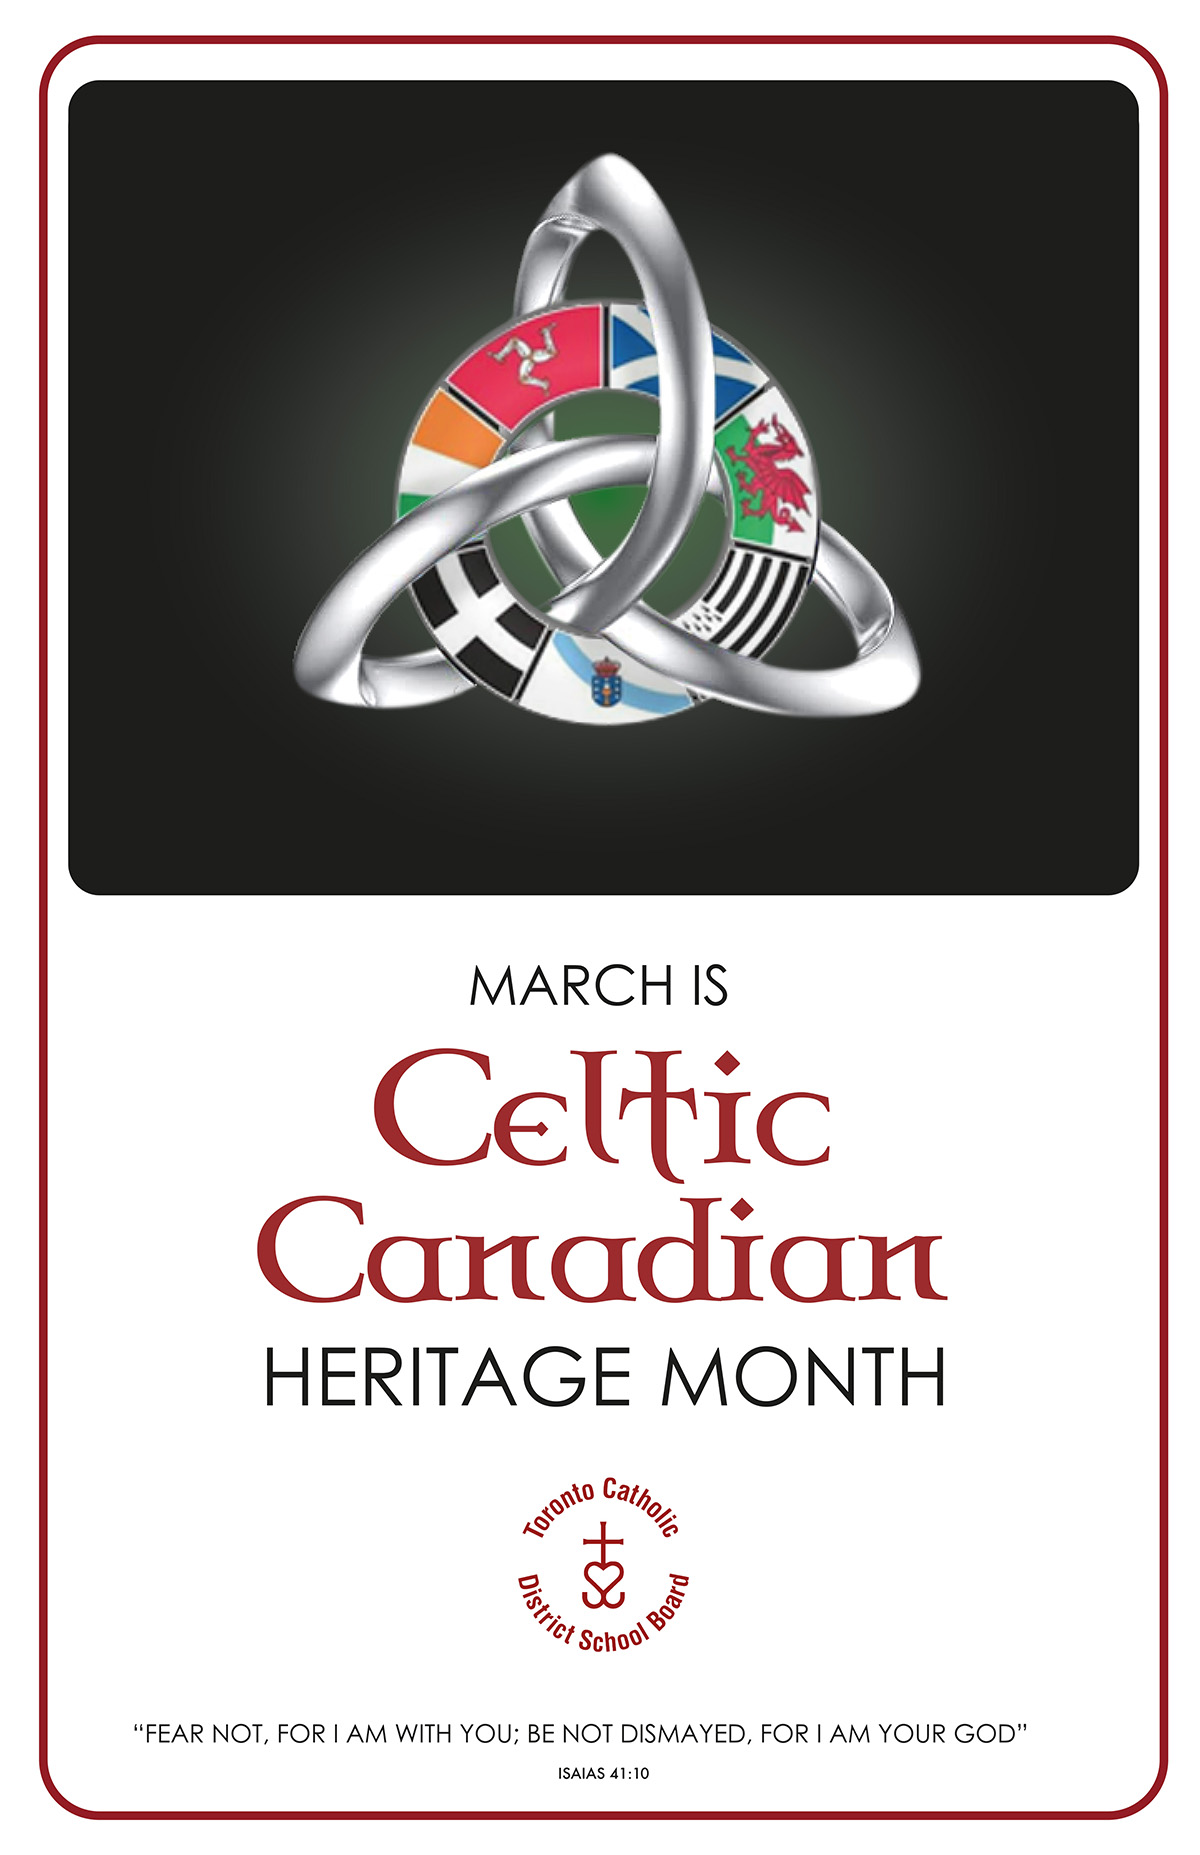 March is Celtic Canadian Heritage Month flyer